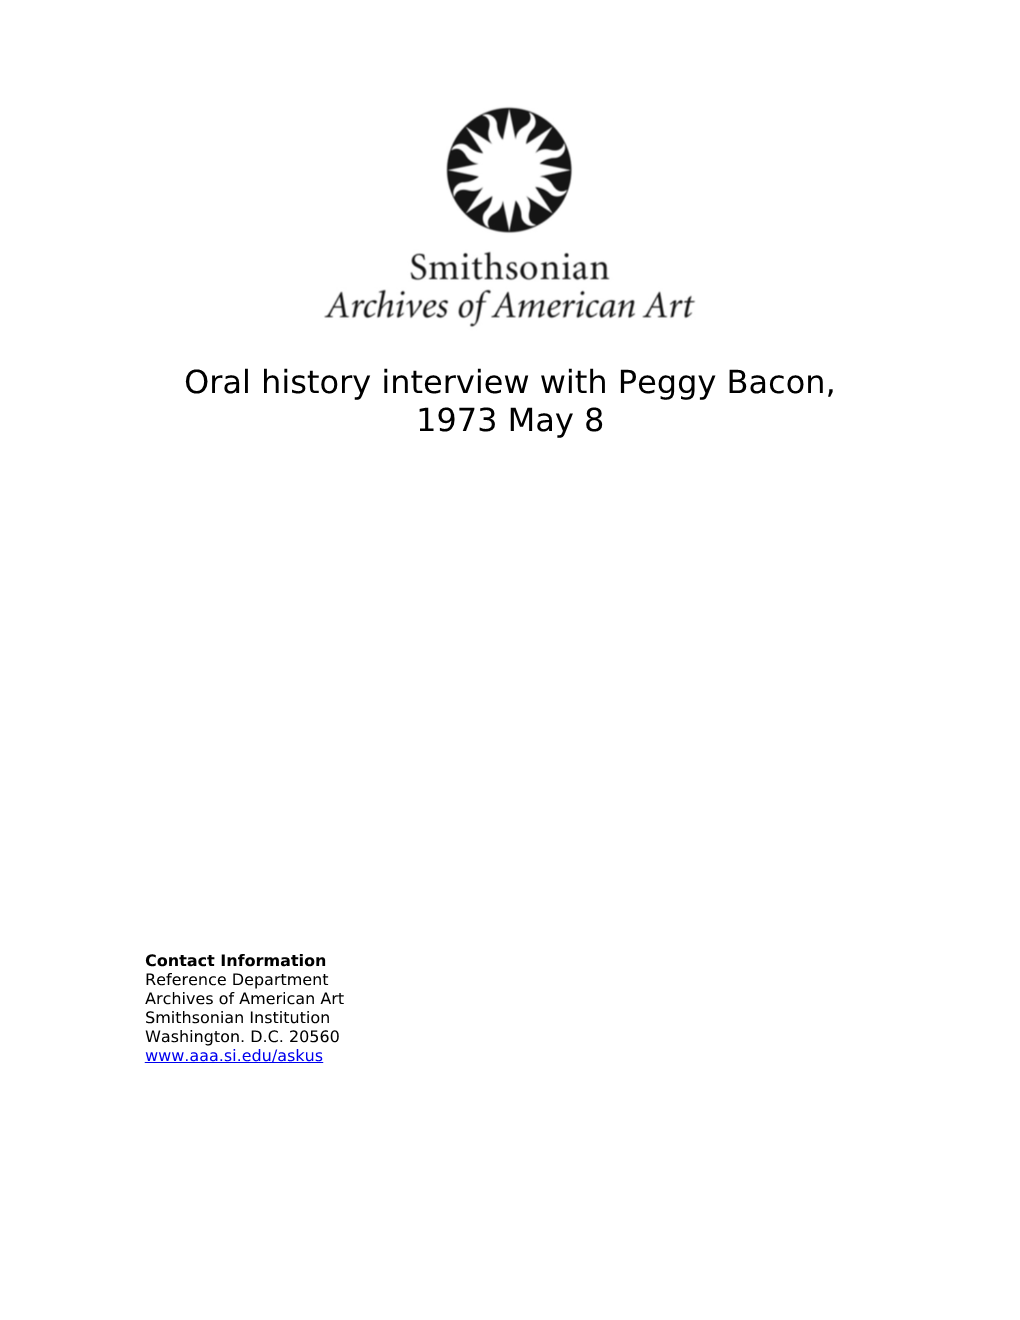 Oral History Interview with Peggy Bacon, 1973 May 8